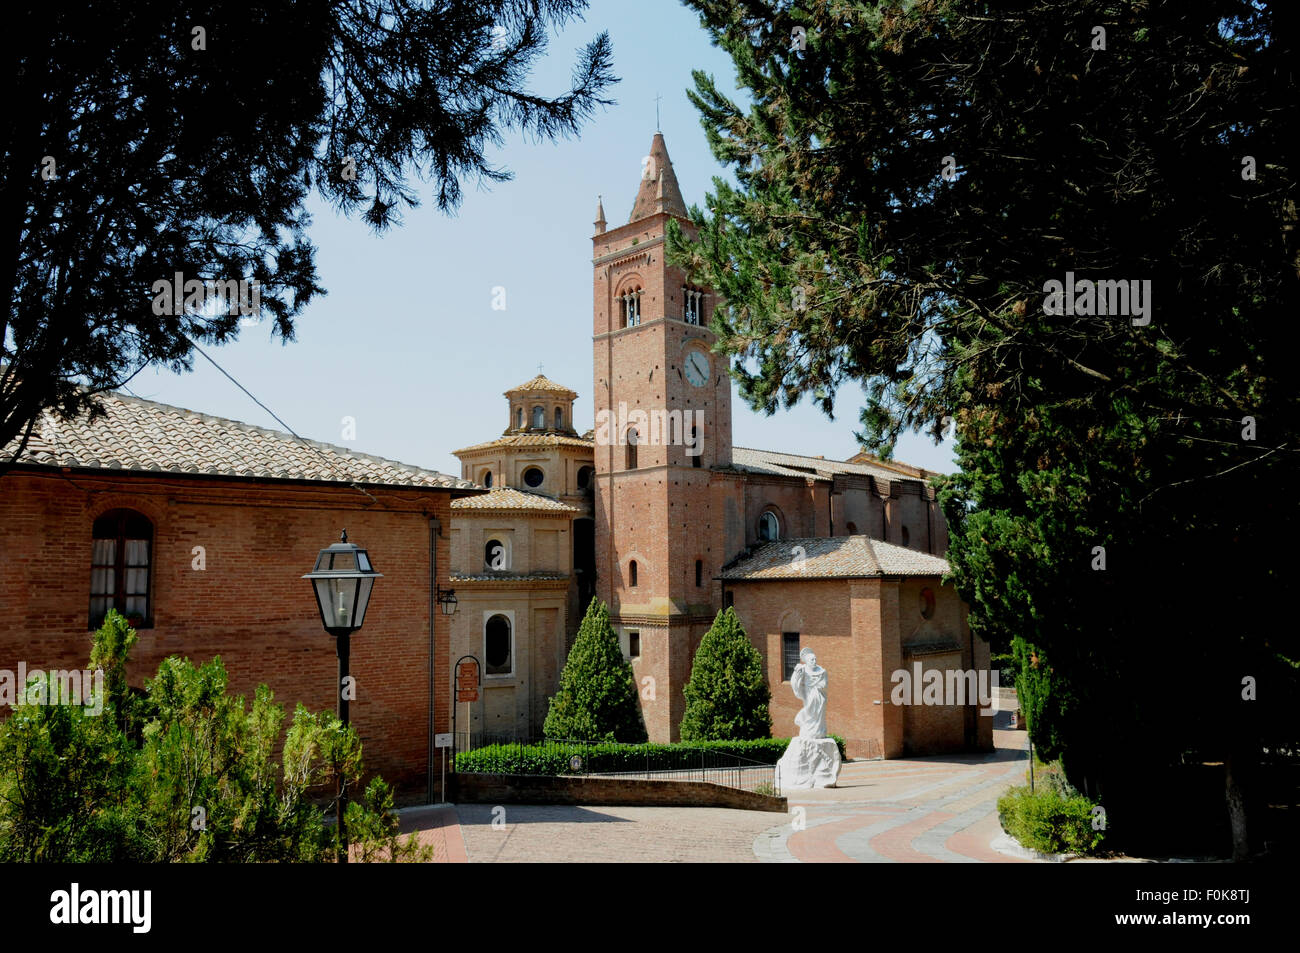 The Abbazia di Monte Oliveto Maggiore, south of Siena, is situated in beautiful countryside southeast of the city. Stock Photo